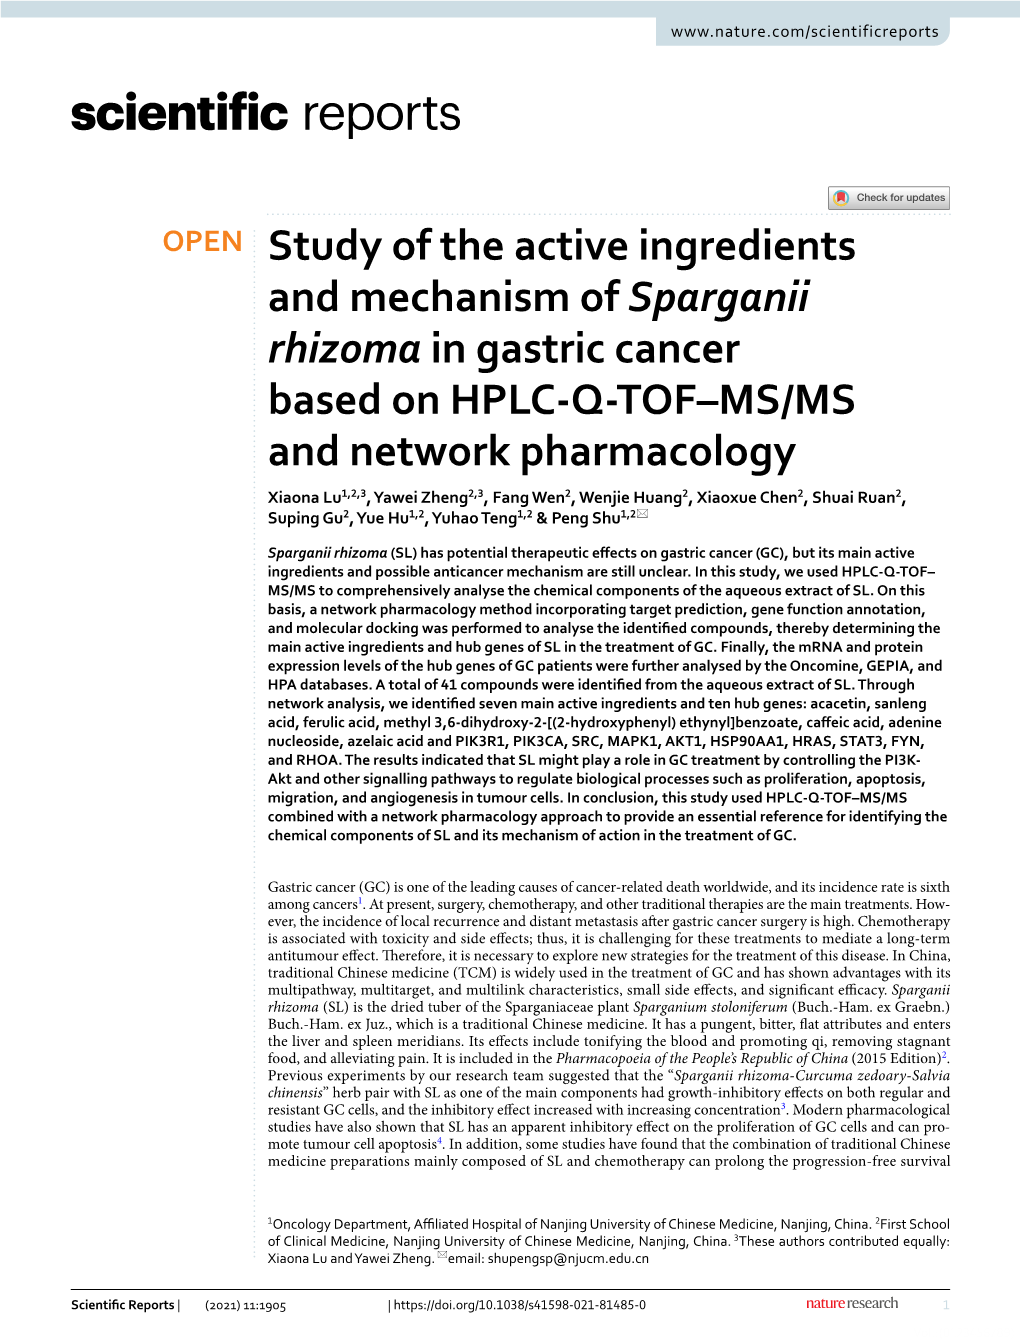 Study of the Active Ingredients and Mechanism of Sparganii Rhizoma In